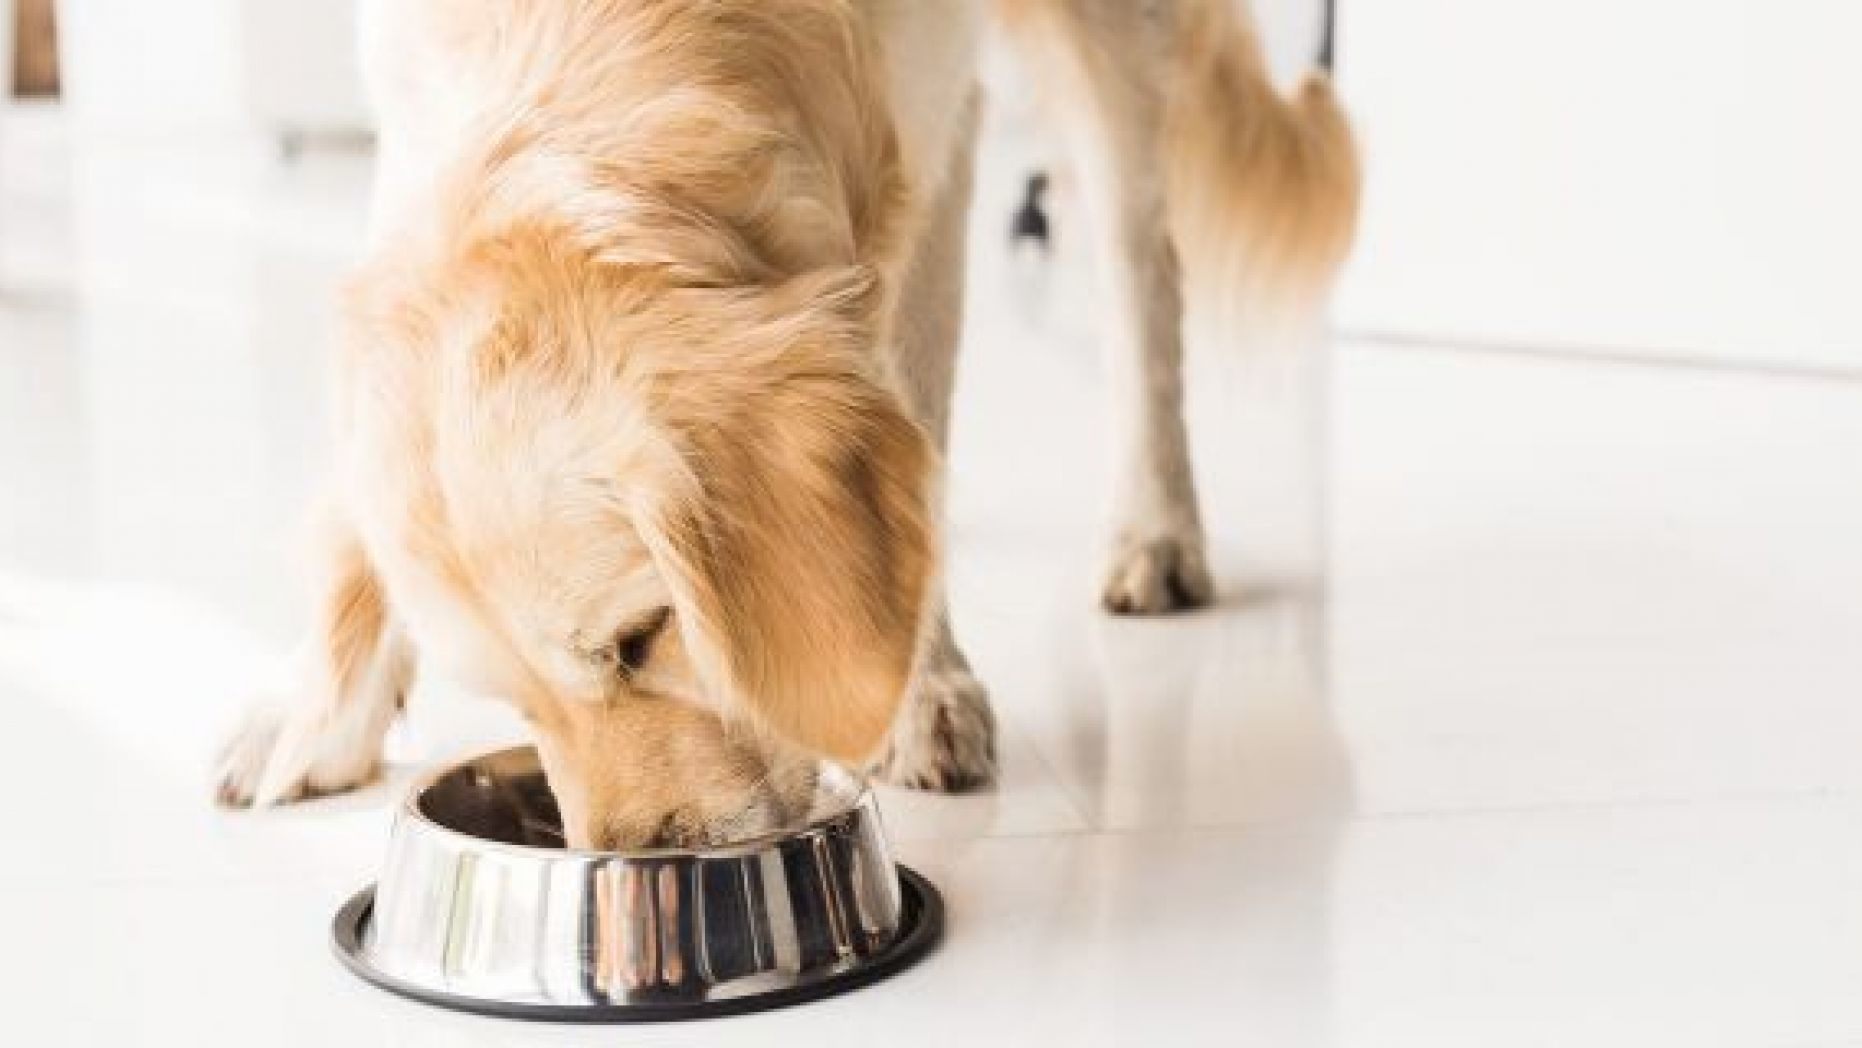 Three lots of Darwin’s Natural Pet Products tested positive for Salmonella, the U.S. Food and Drug Administration said Tuesday. 